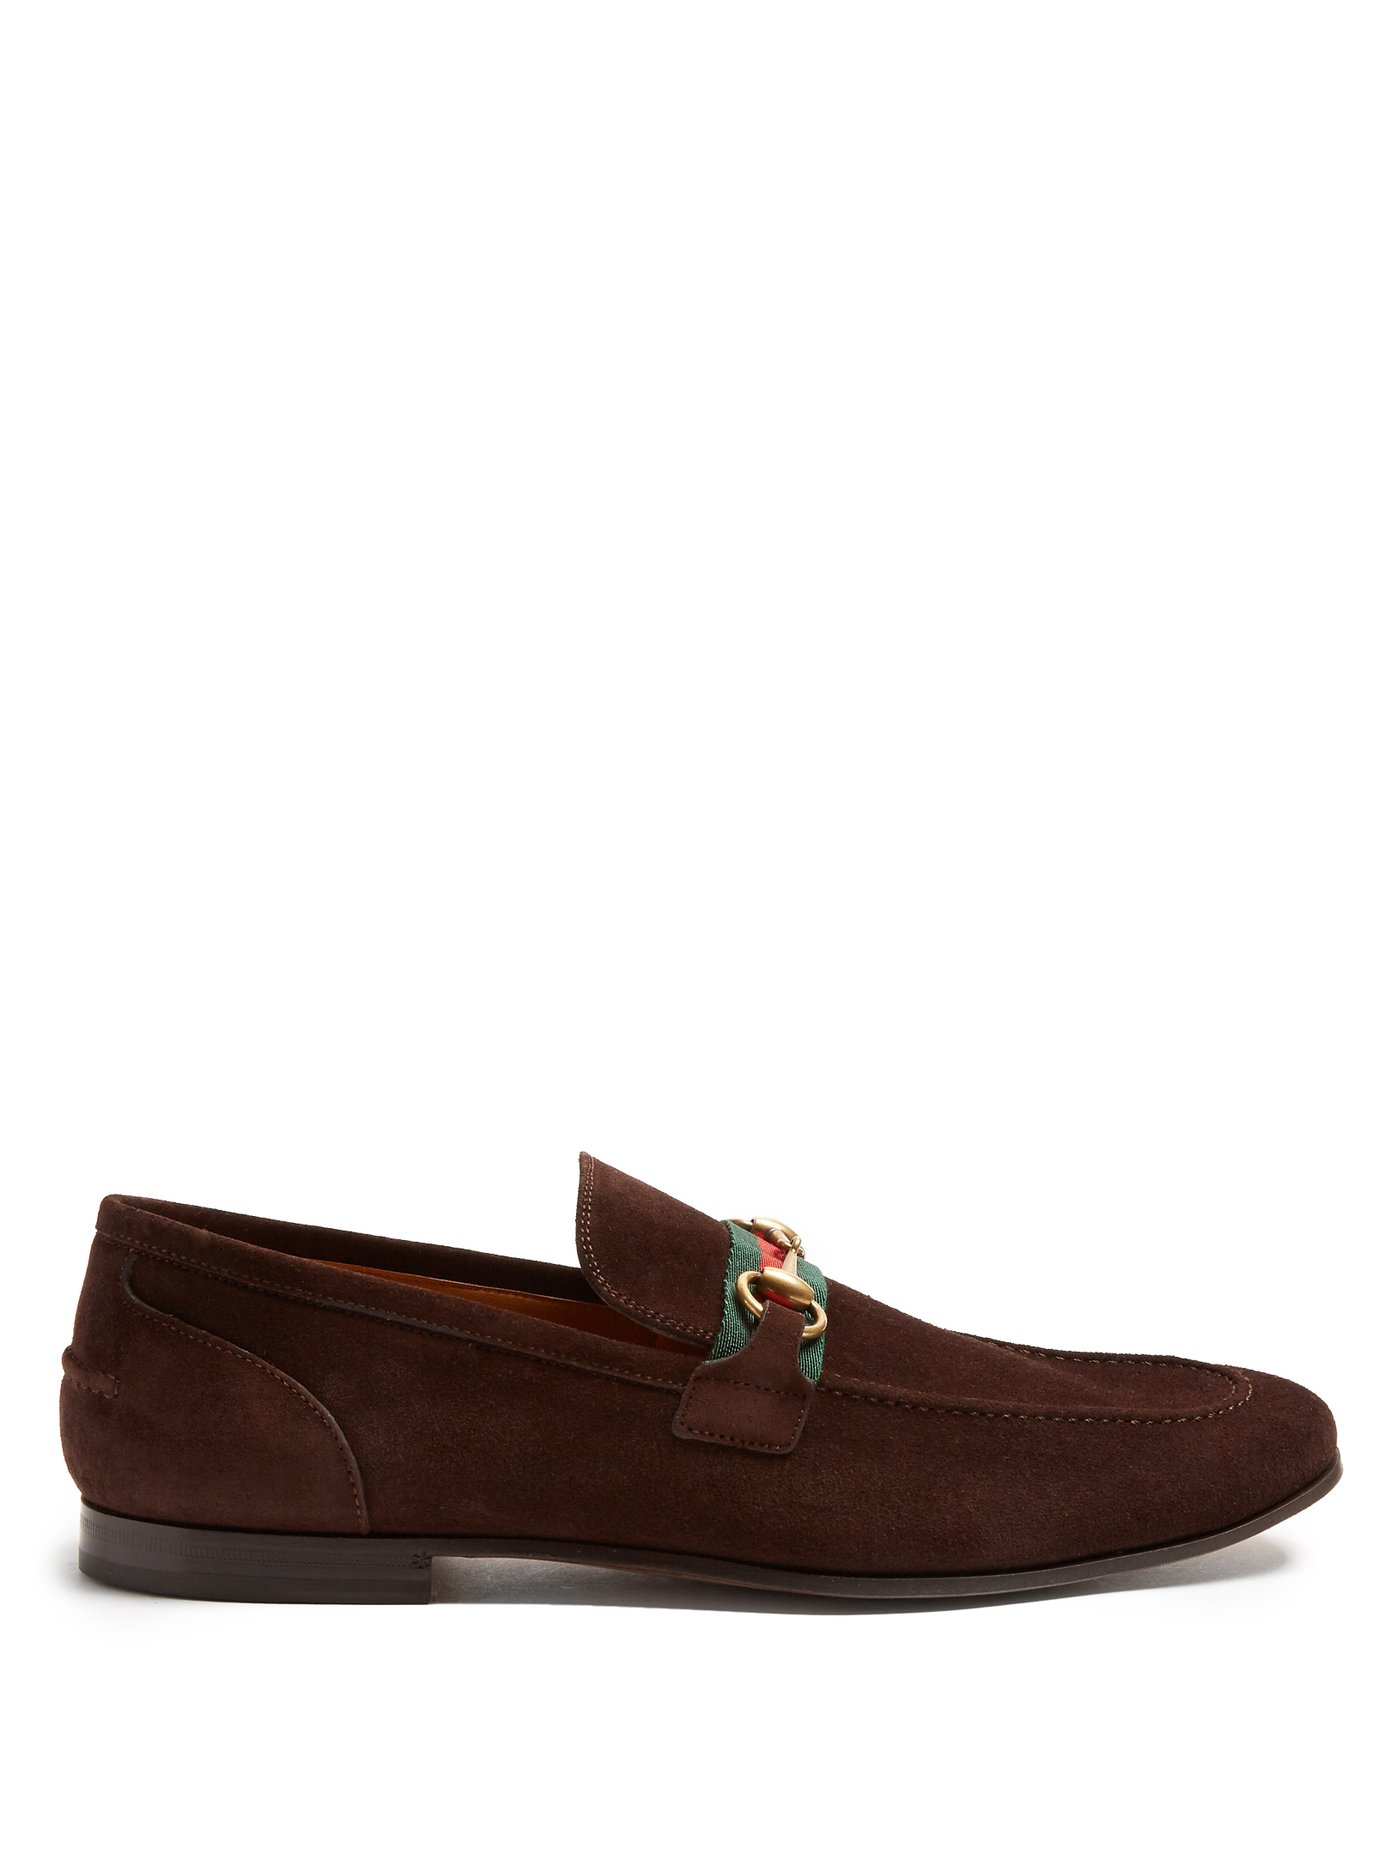 Elanor suede loafers | Gucci 